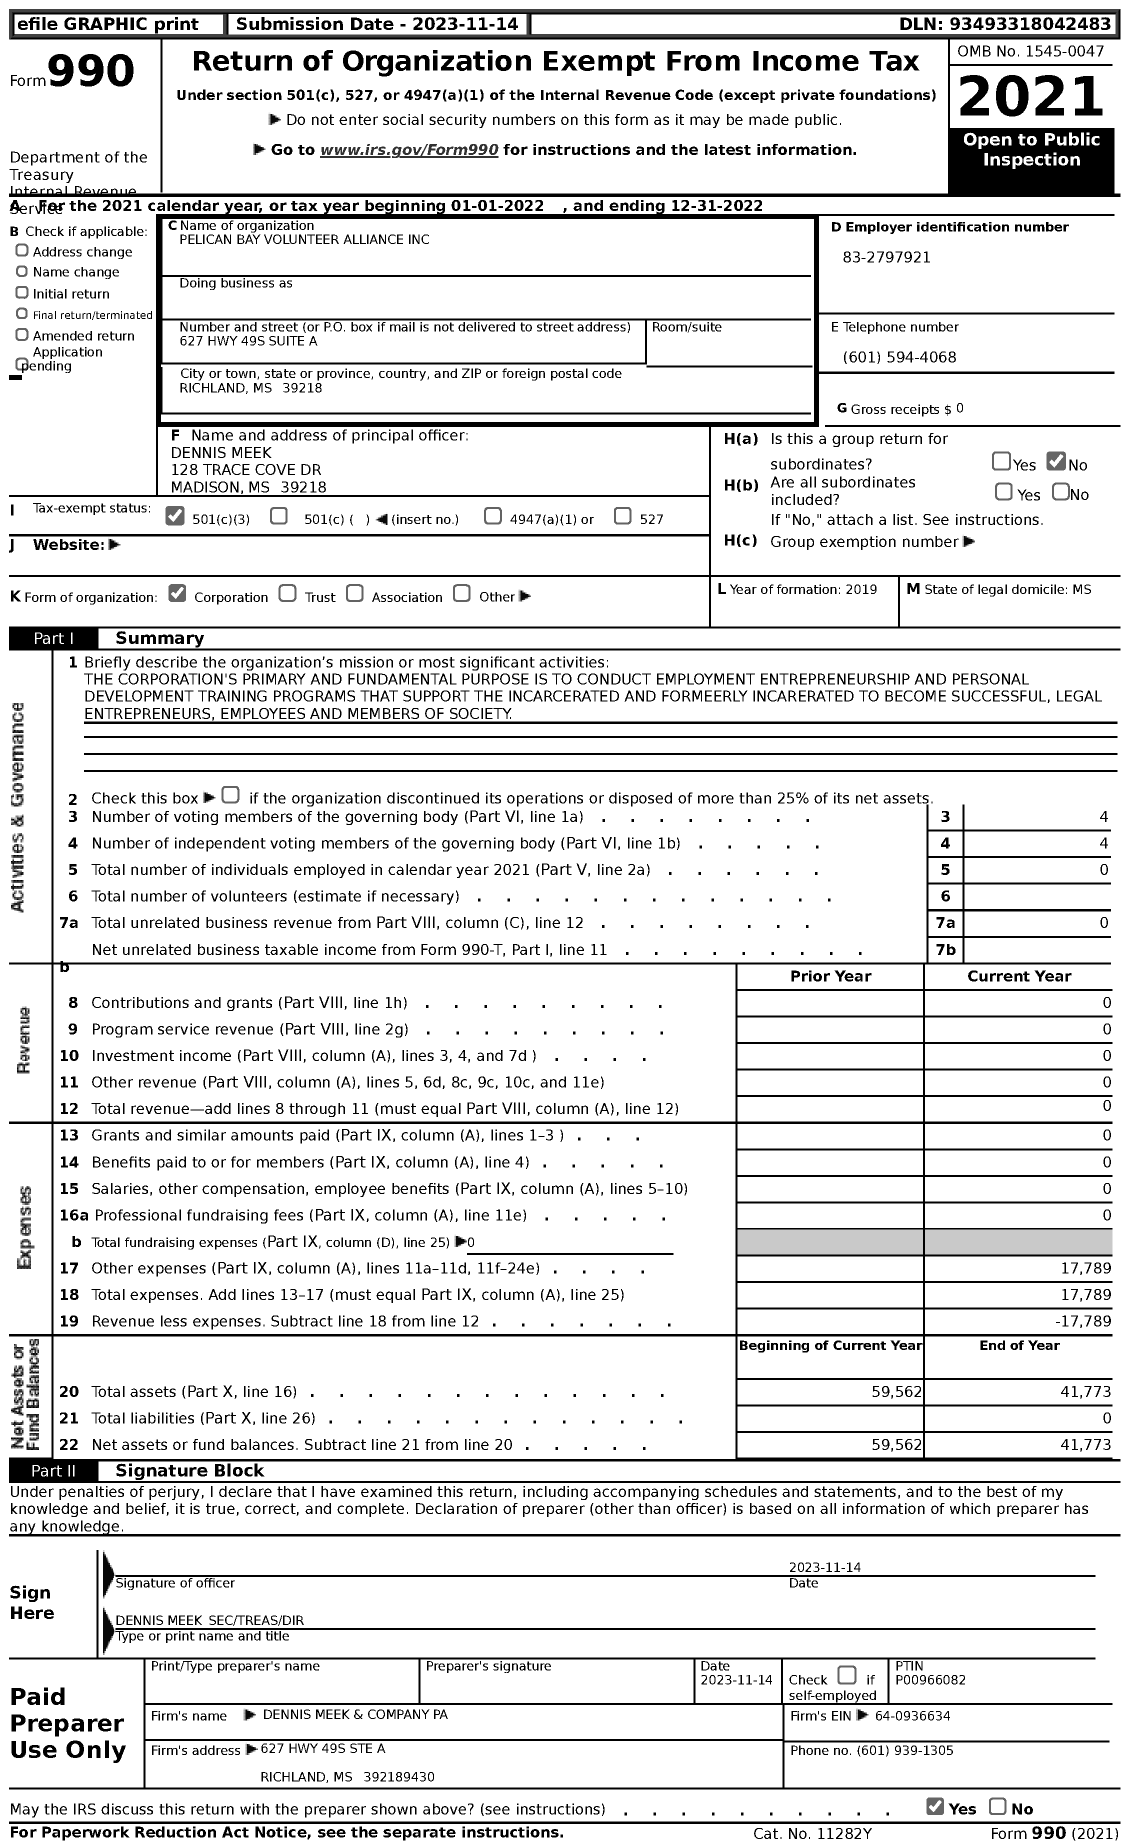 Image of first page of 2022 Form 990 for Pelican Bay Volunteer Alliance